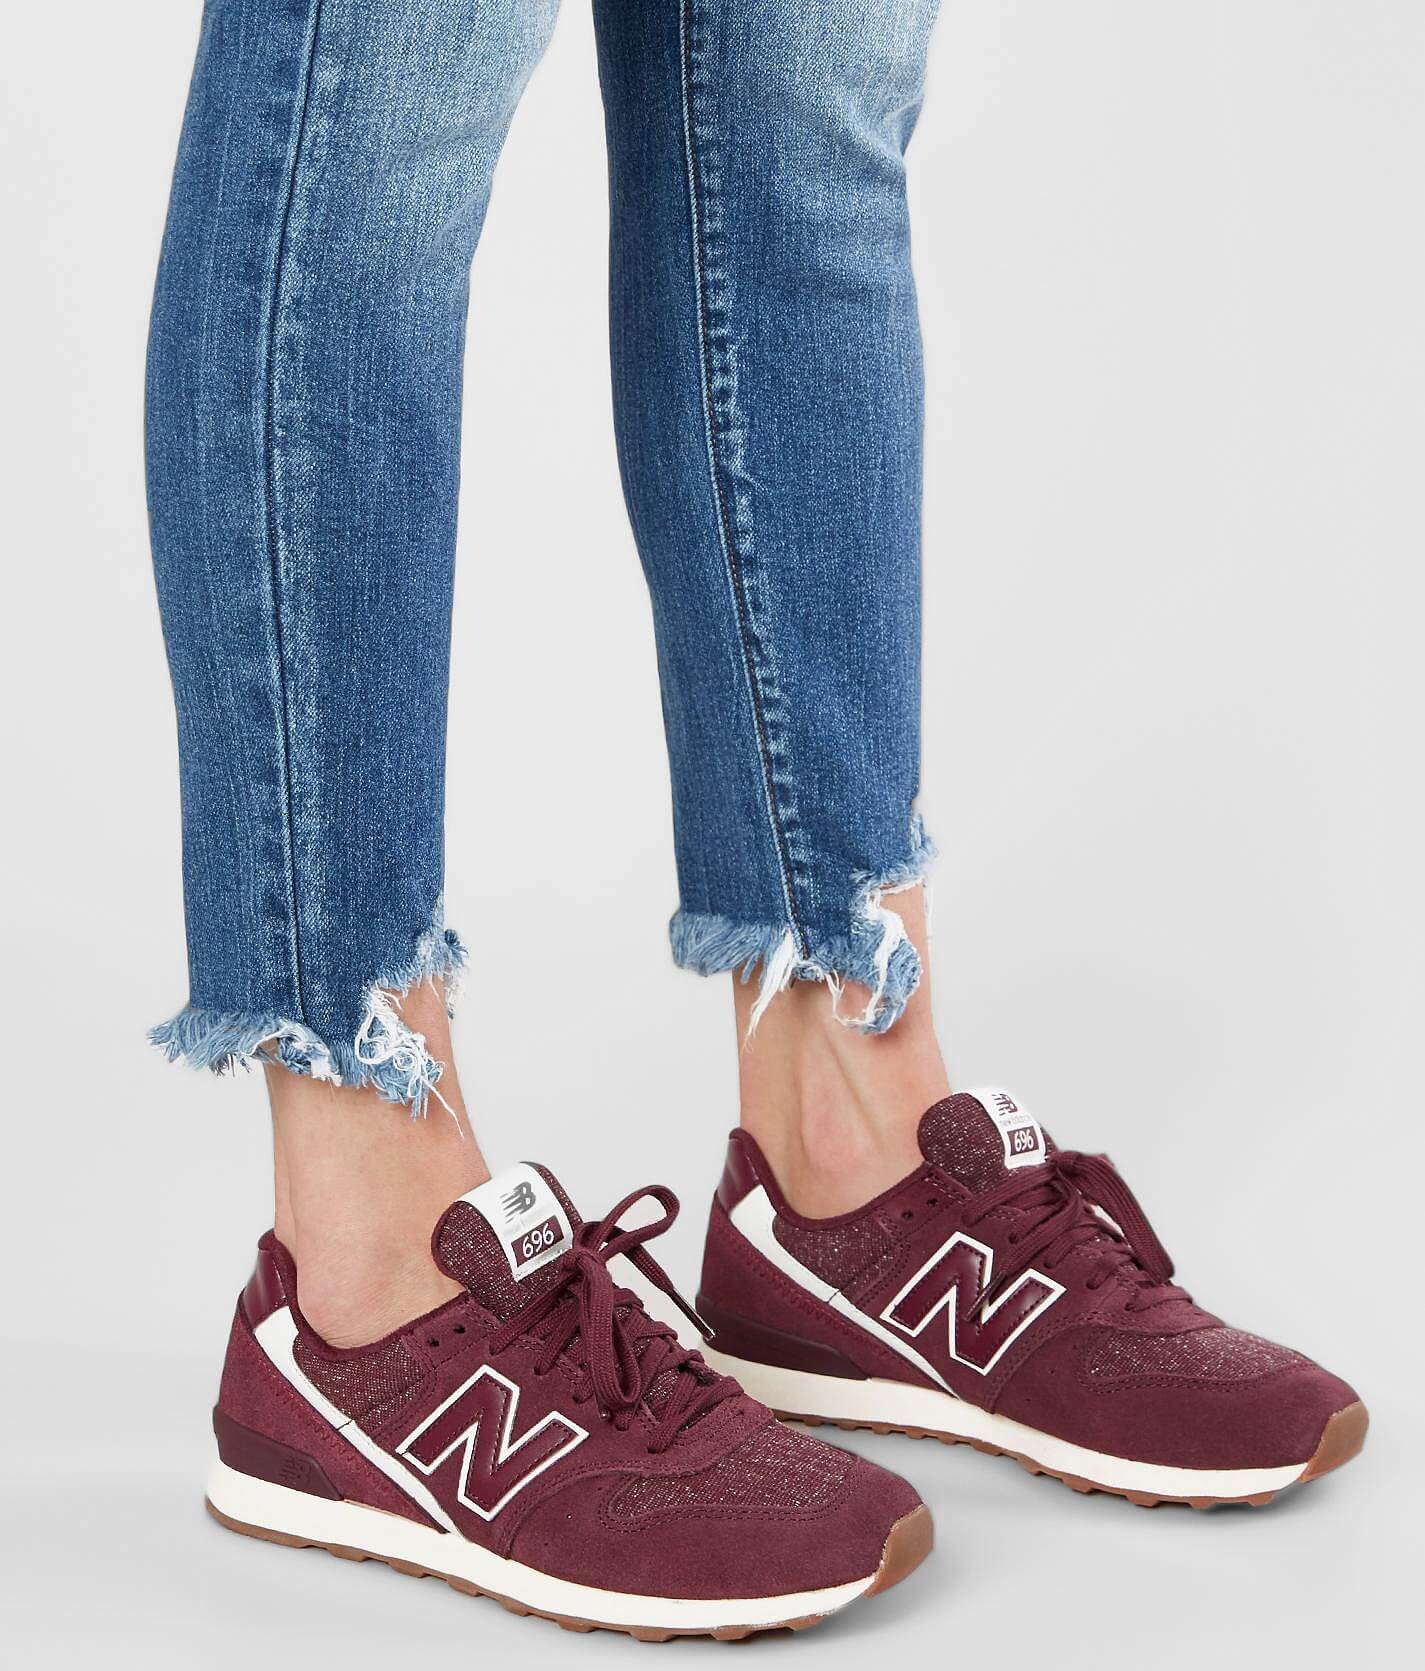 new balance womens leather shoes